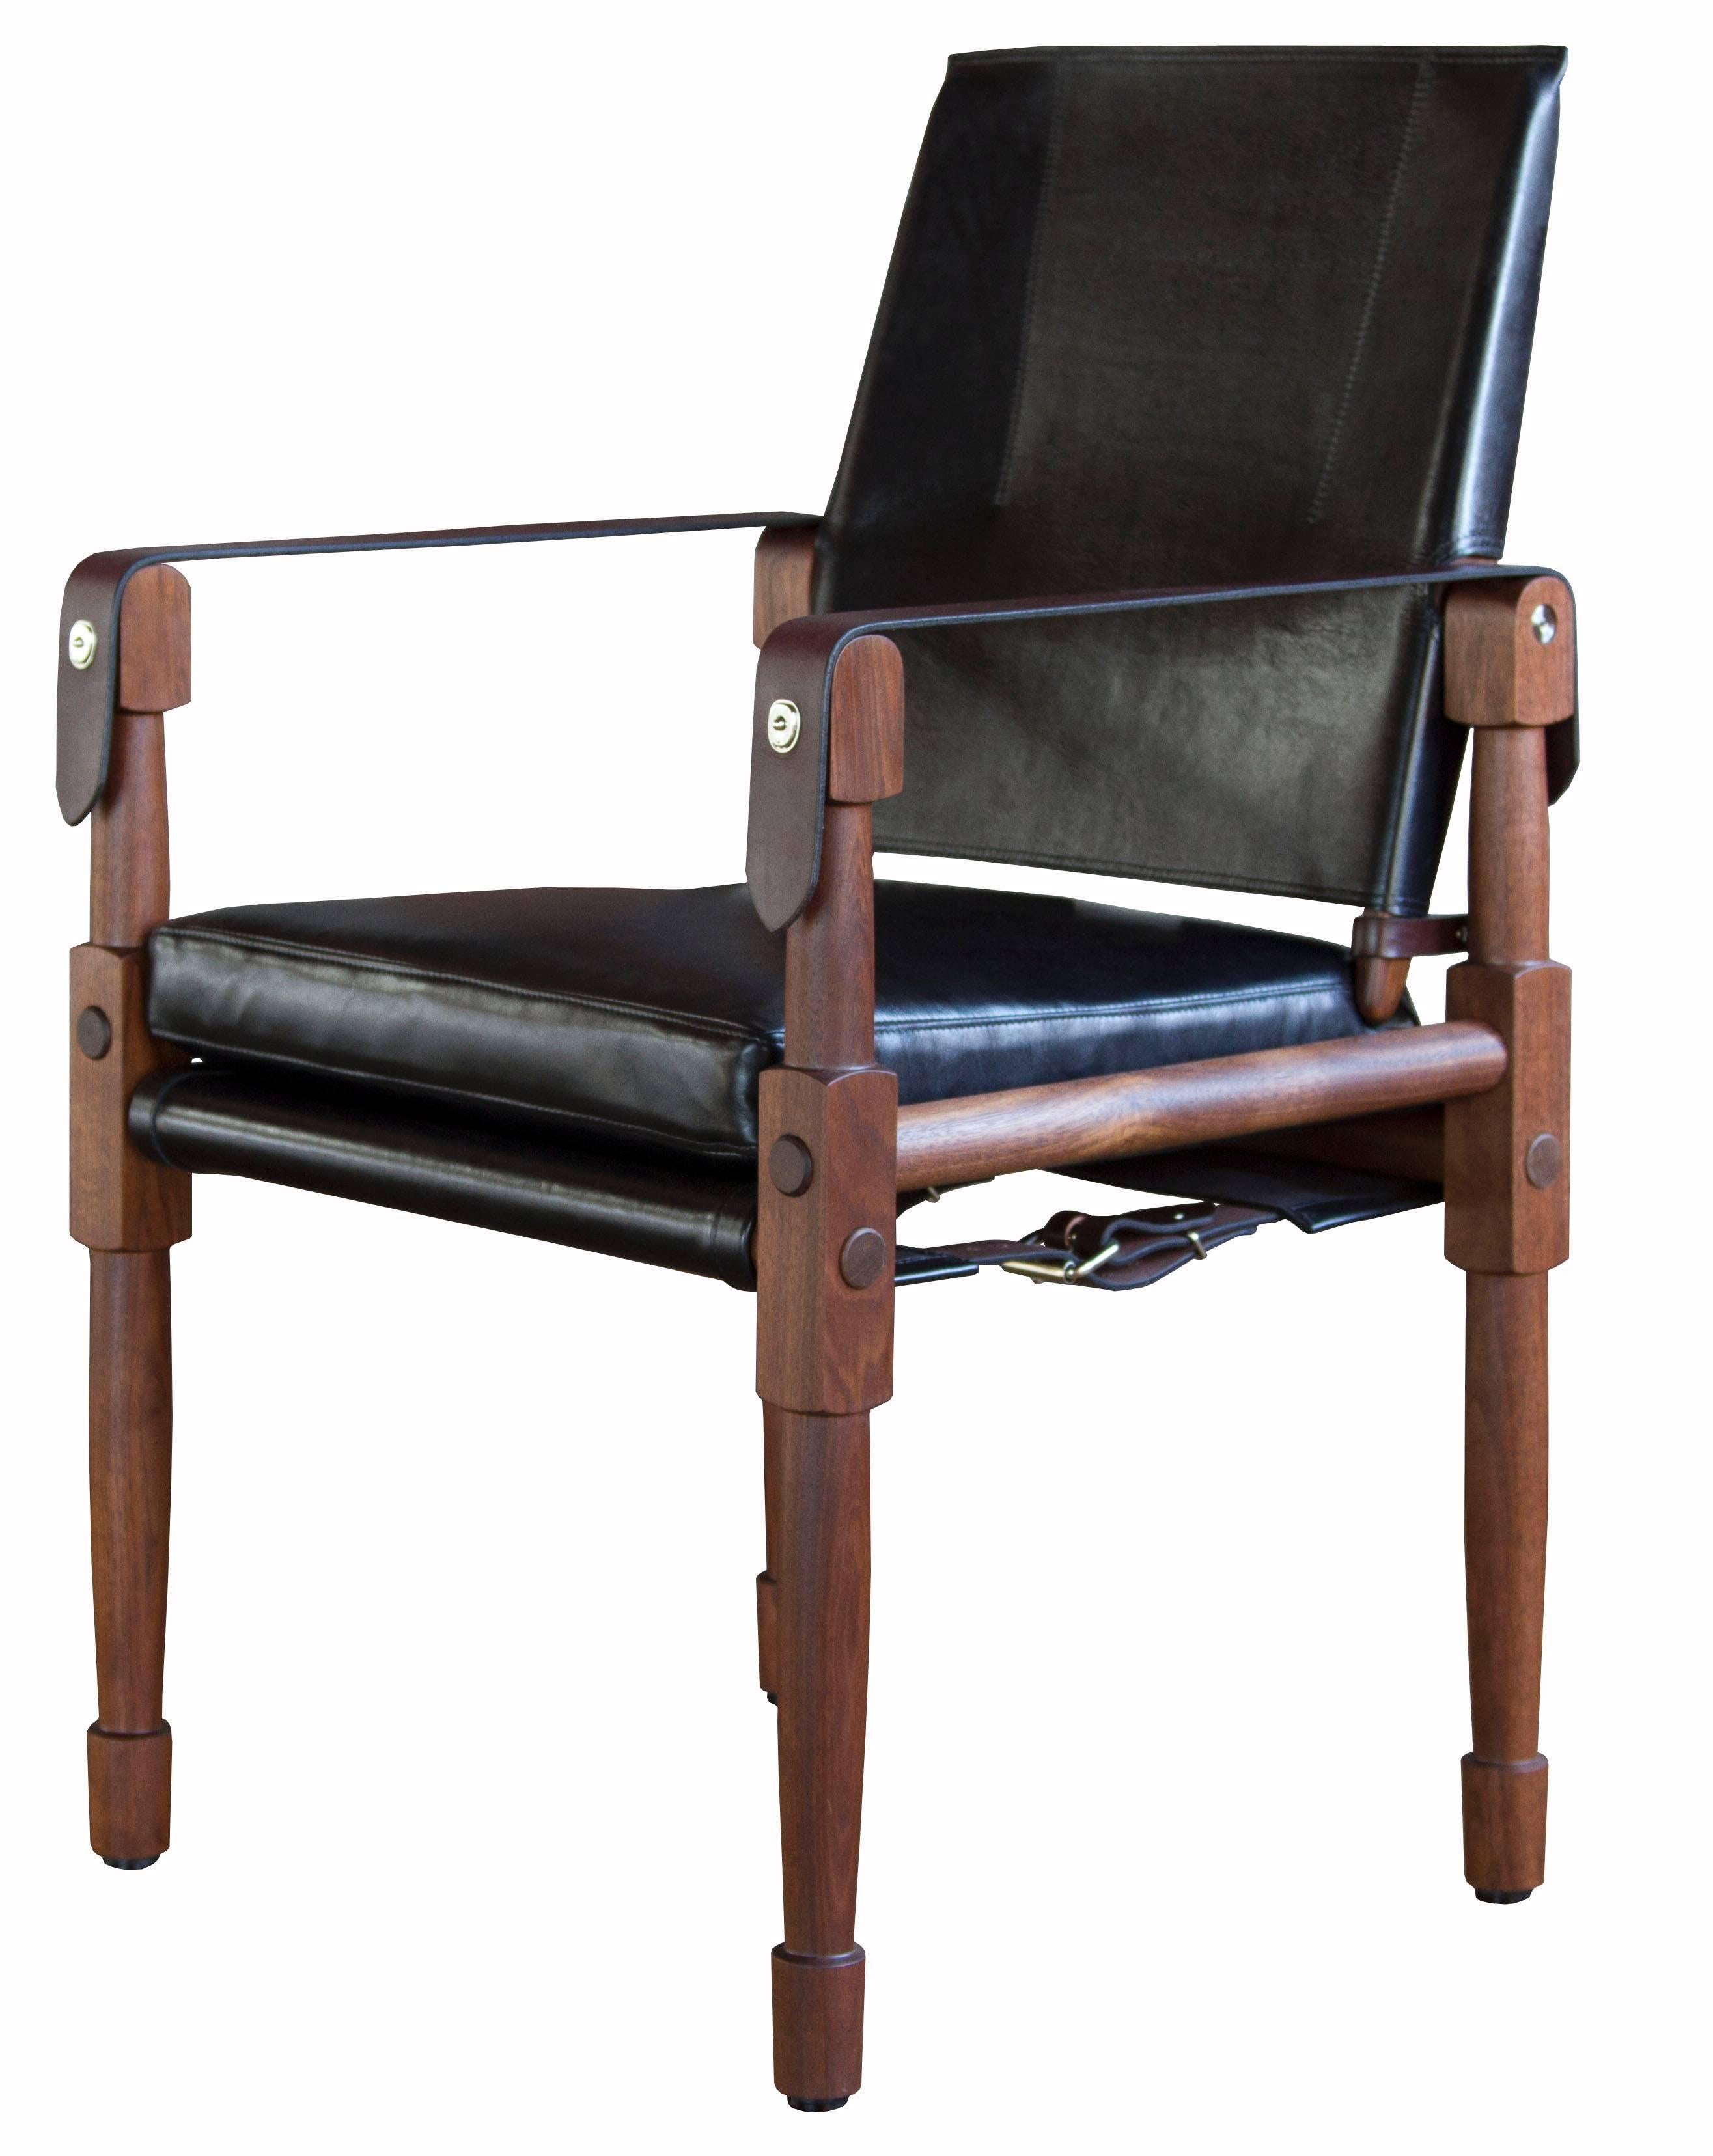 A Chatwin dining chair in oiled walnut with Moore & Giles: Notting Hill / Black and Havana English bridle leather straps.

The modern campaign collection by Richard Wrightman combines the vernacular of traditional form with a modern aesthetic,